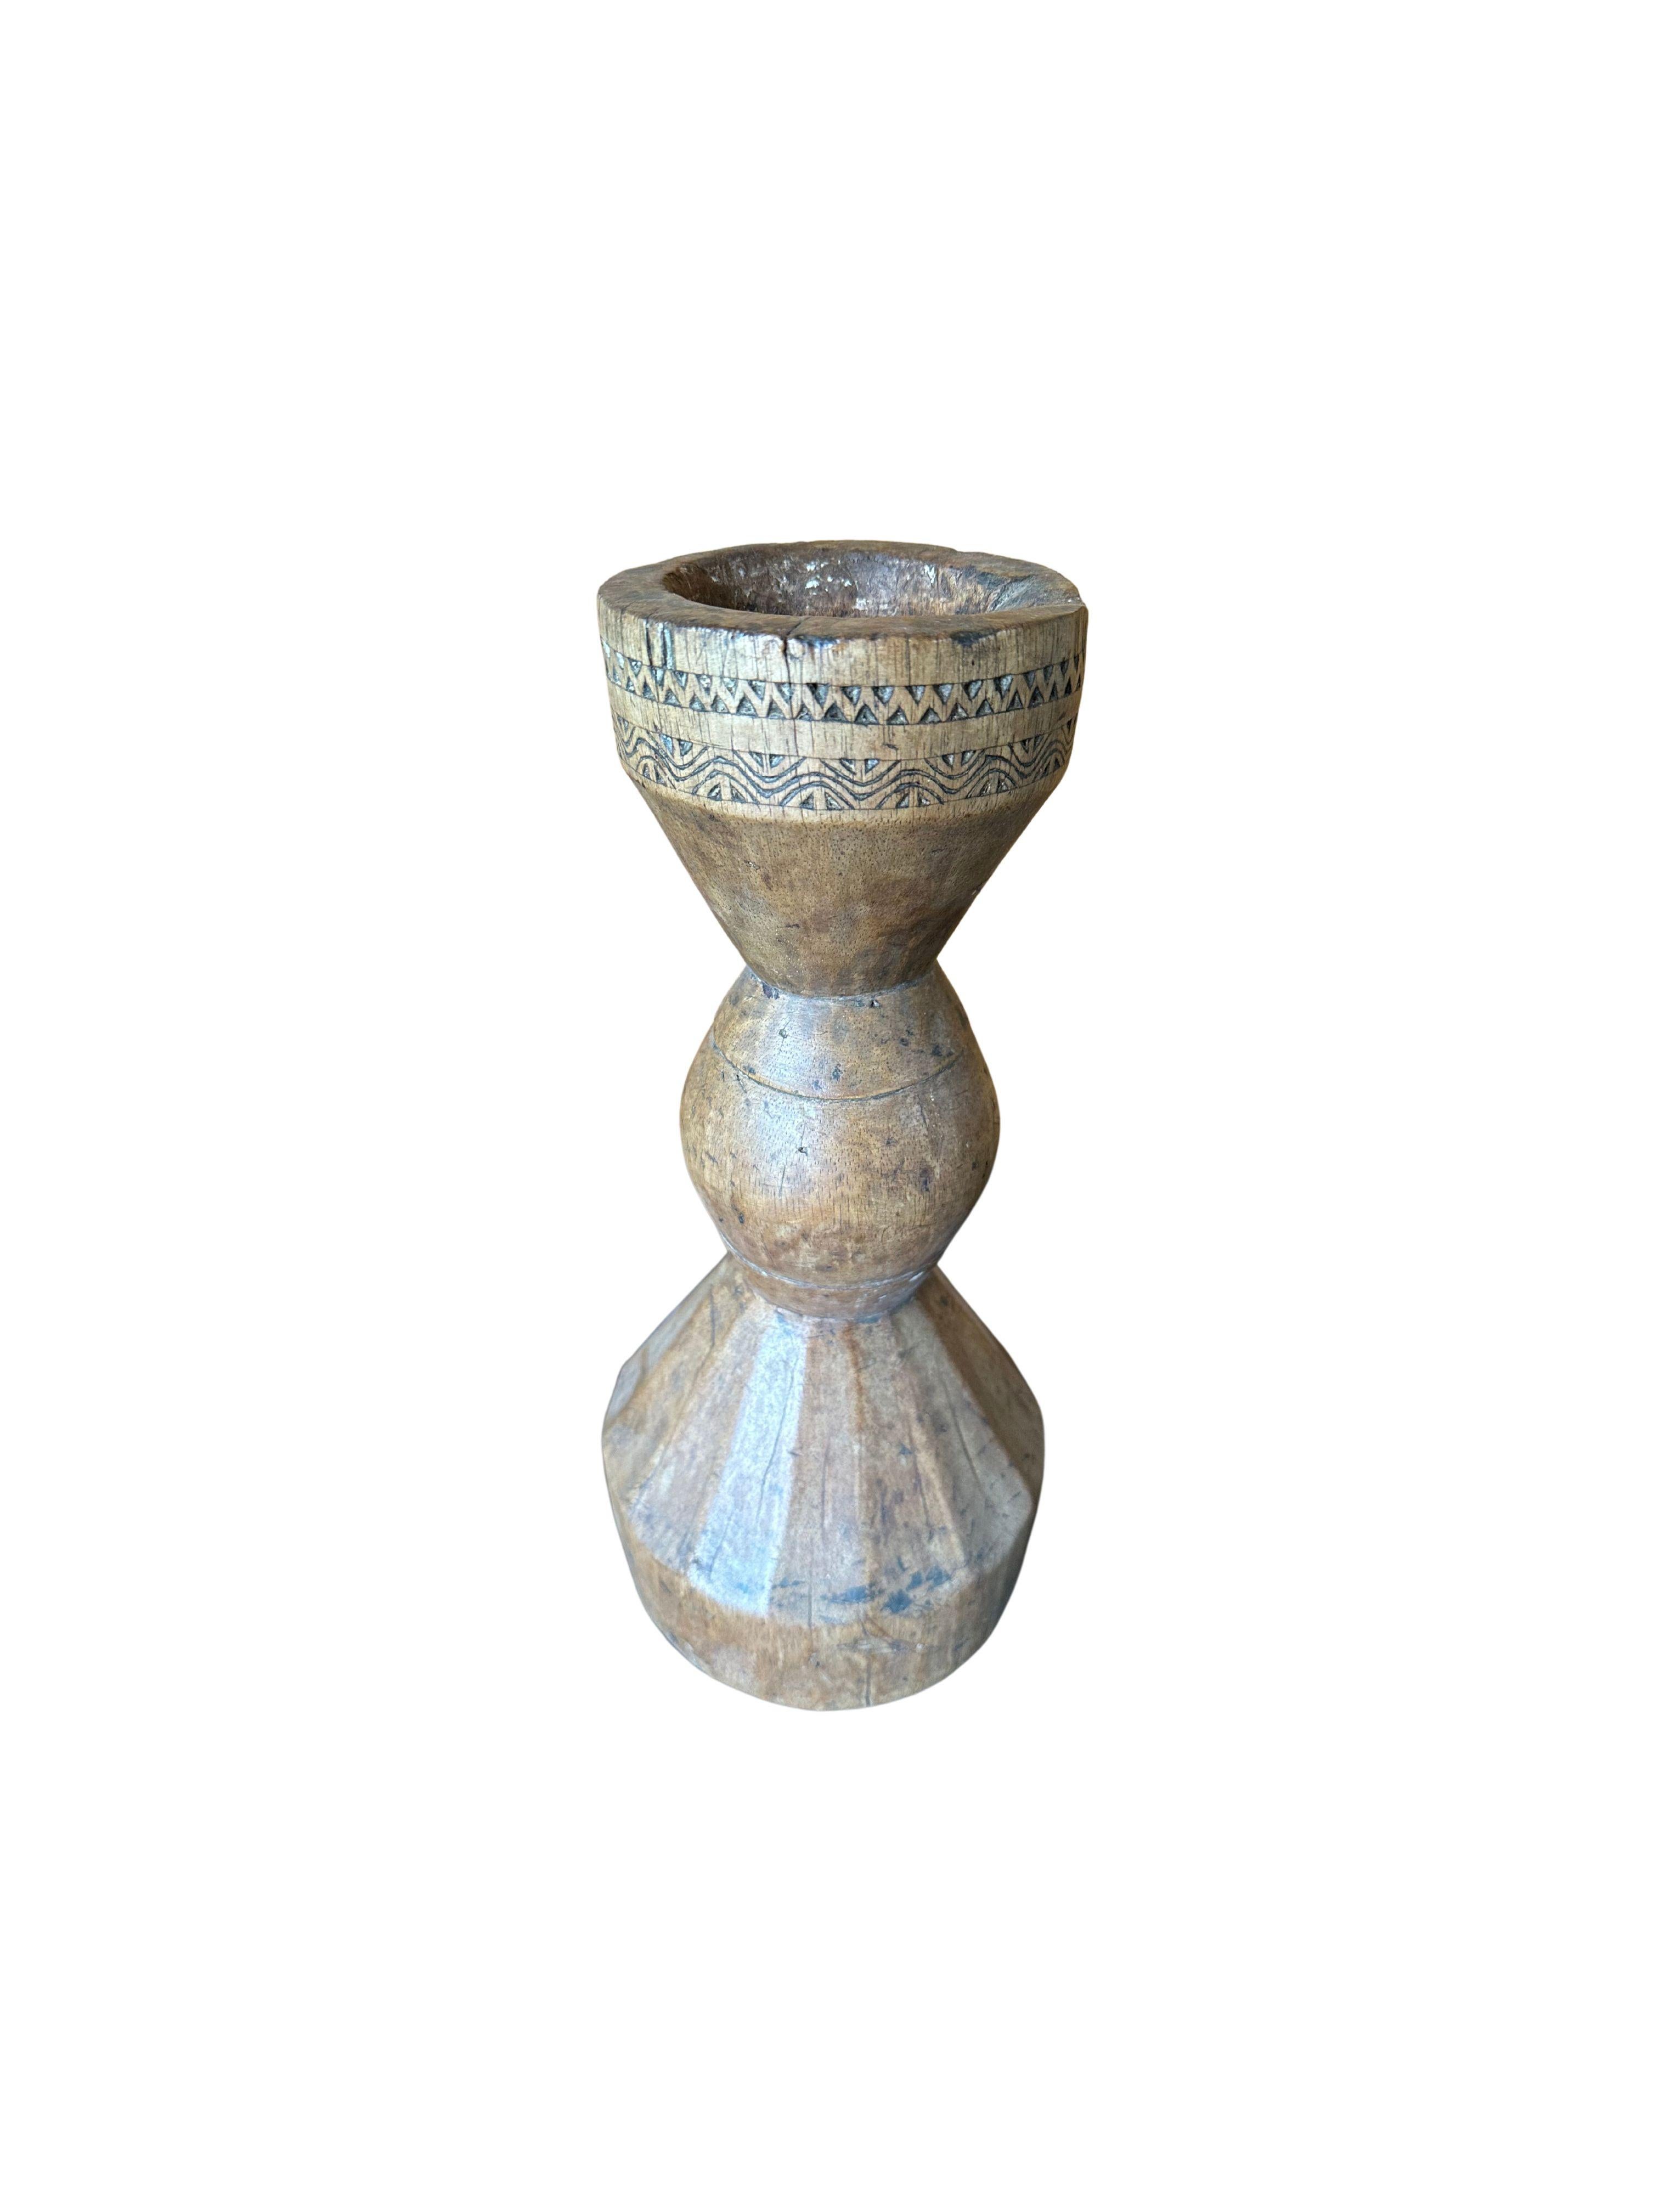 A vintage candle holder from the island of java. This candle holder features carved detailing around its shoulder. A wonderful sculptural object to bring warmth to any space. The age related fading of the wood, wood textures and shades add to its